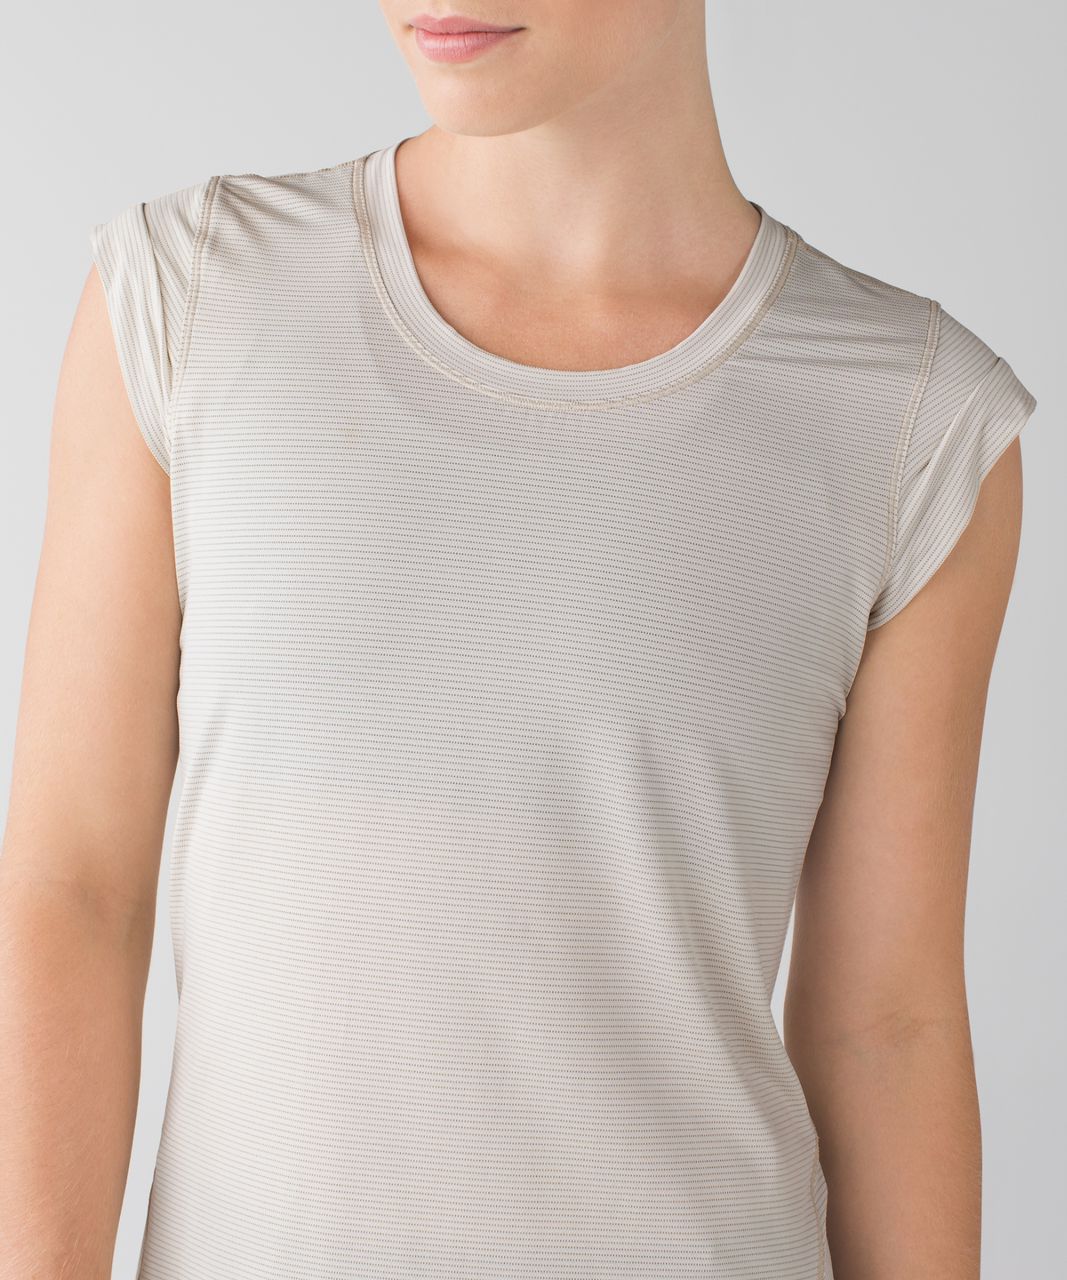 Lululemon Pedal To The Medal Short Sleeve - Heathered Angel Wing